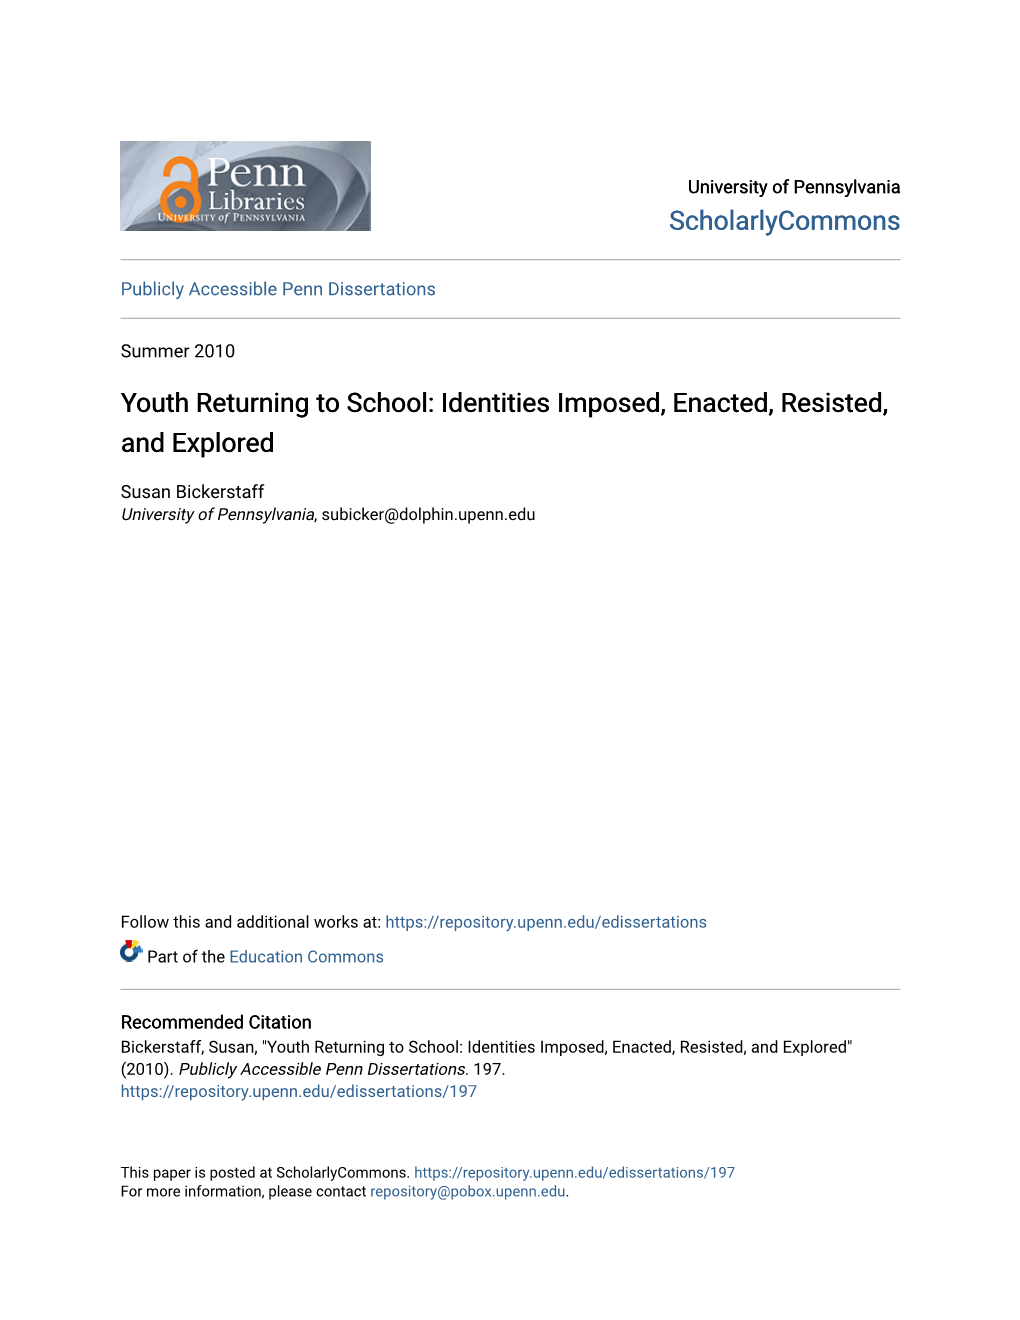 Youth Returning to School: Identities Imposed, Enacted, Resisted, and Explored